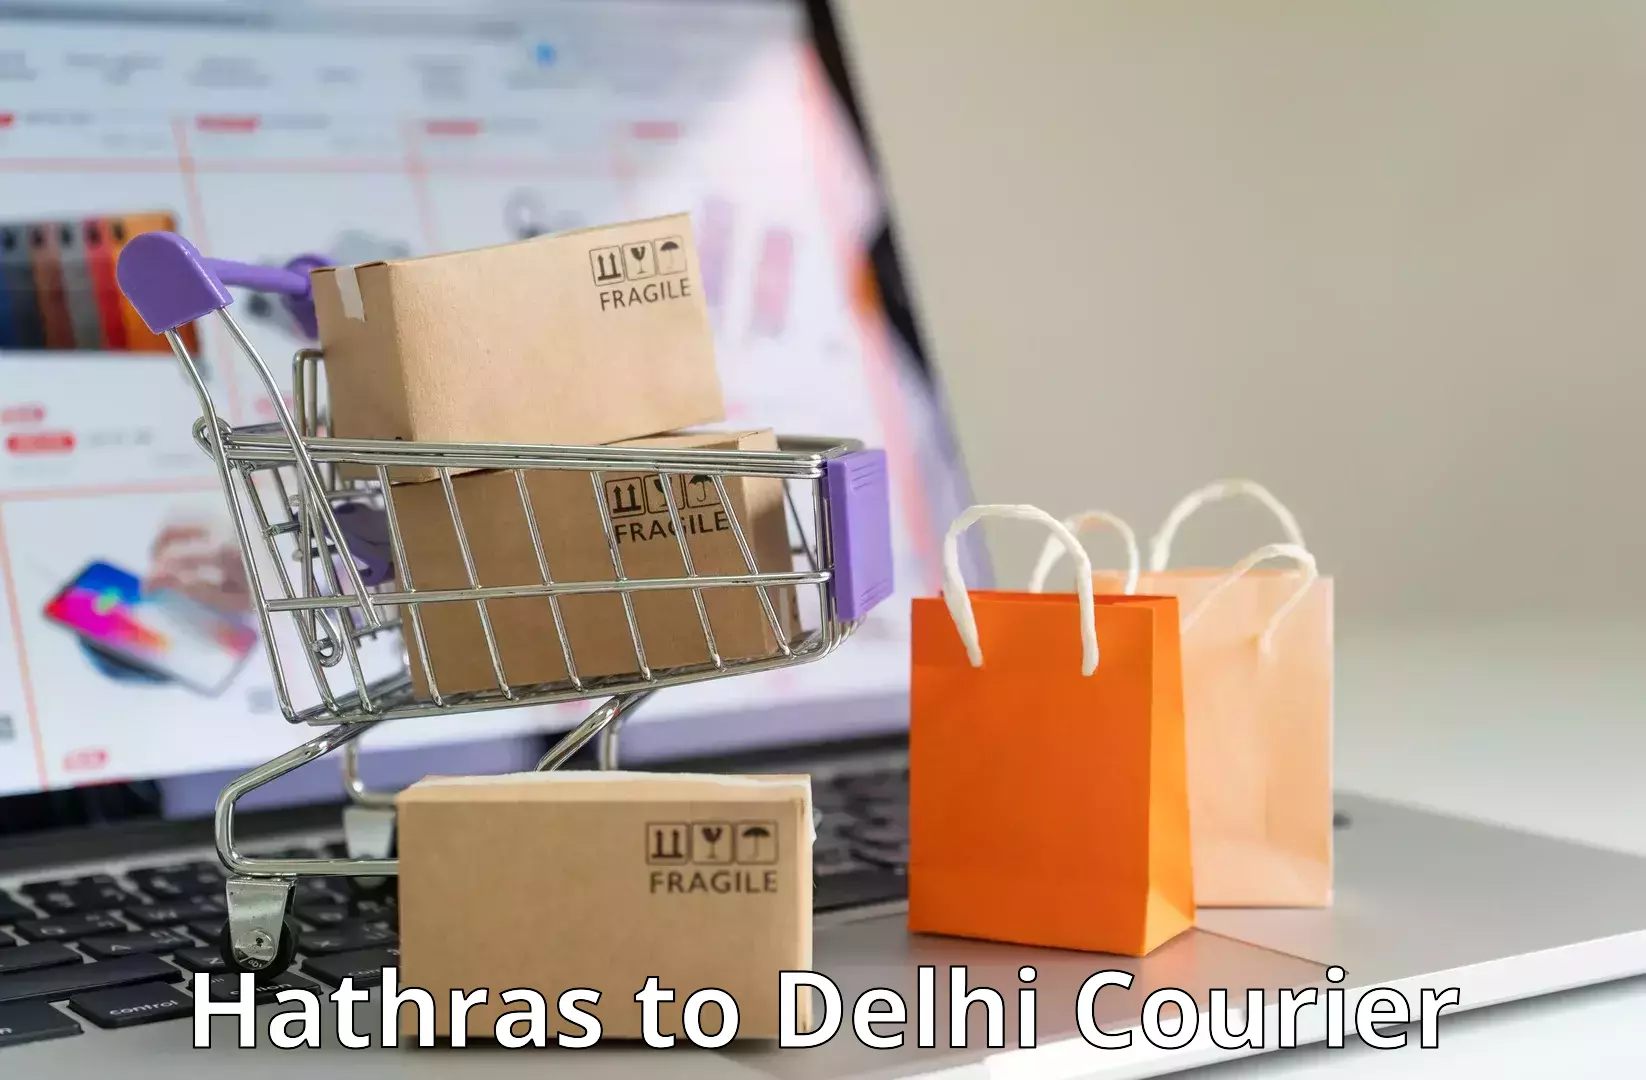 Quality courier partnerships Hathras to NCR